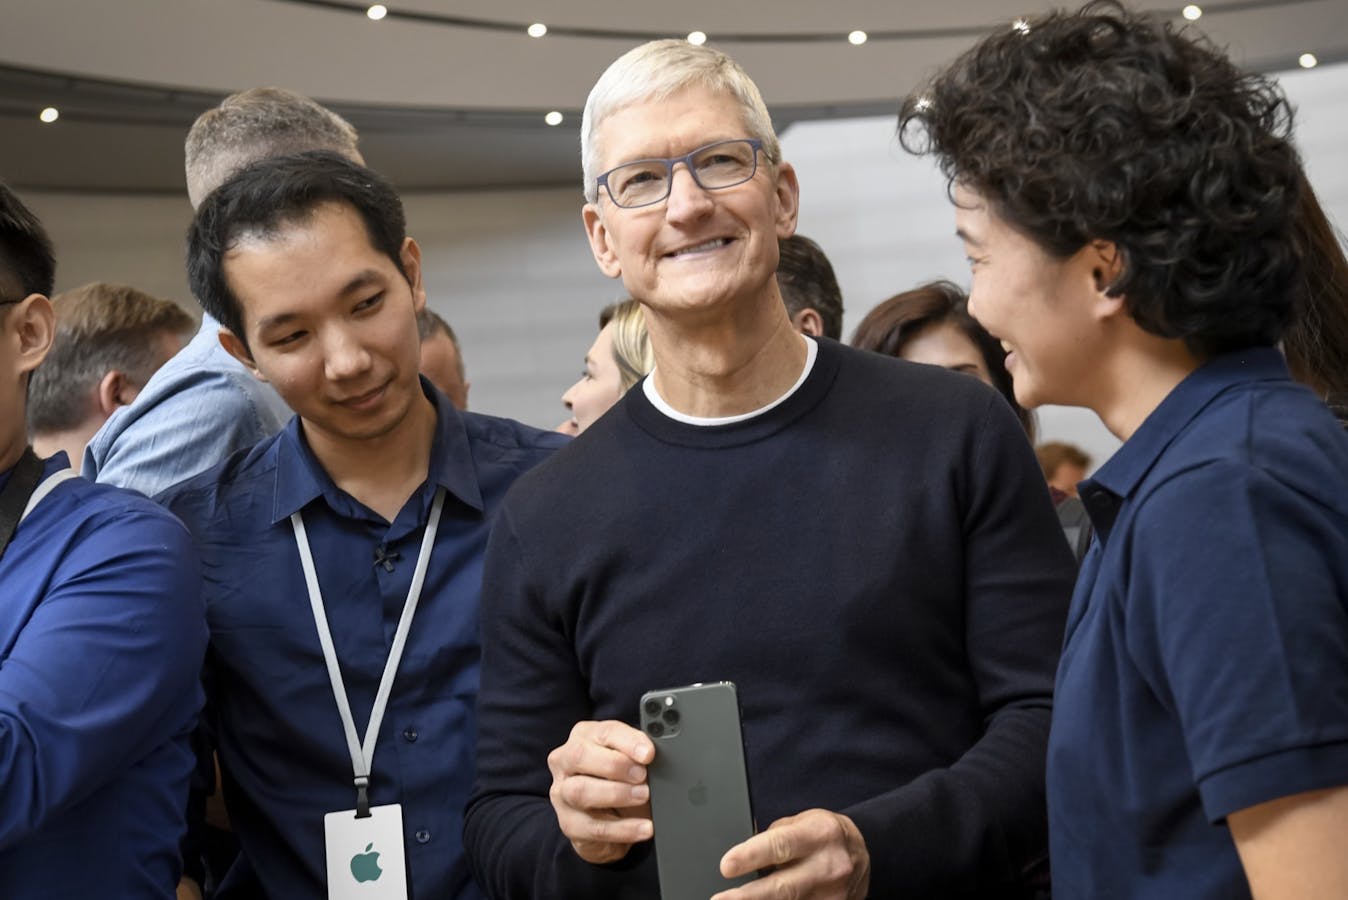 Apple CEO Tim Cook holds the iPhone 11 Pro after an event unveiling it last September. Photo by Bloomberg